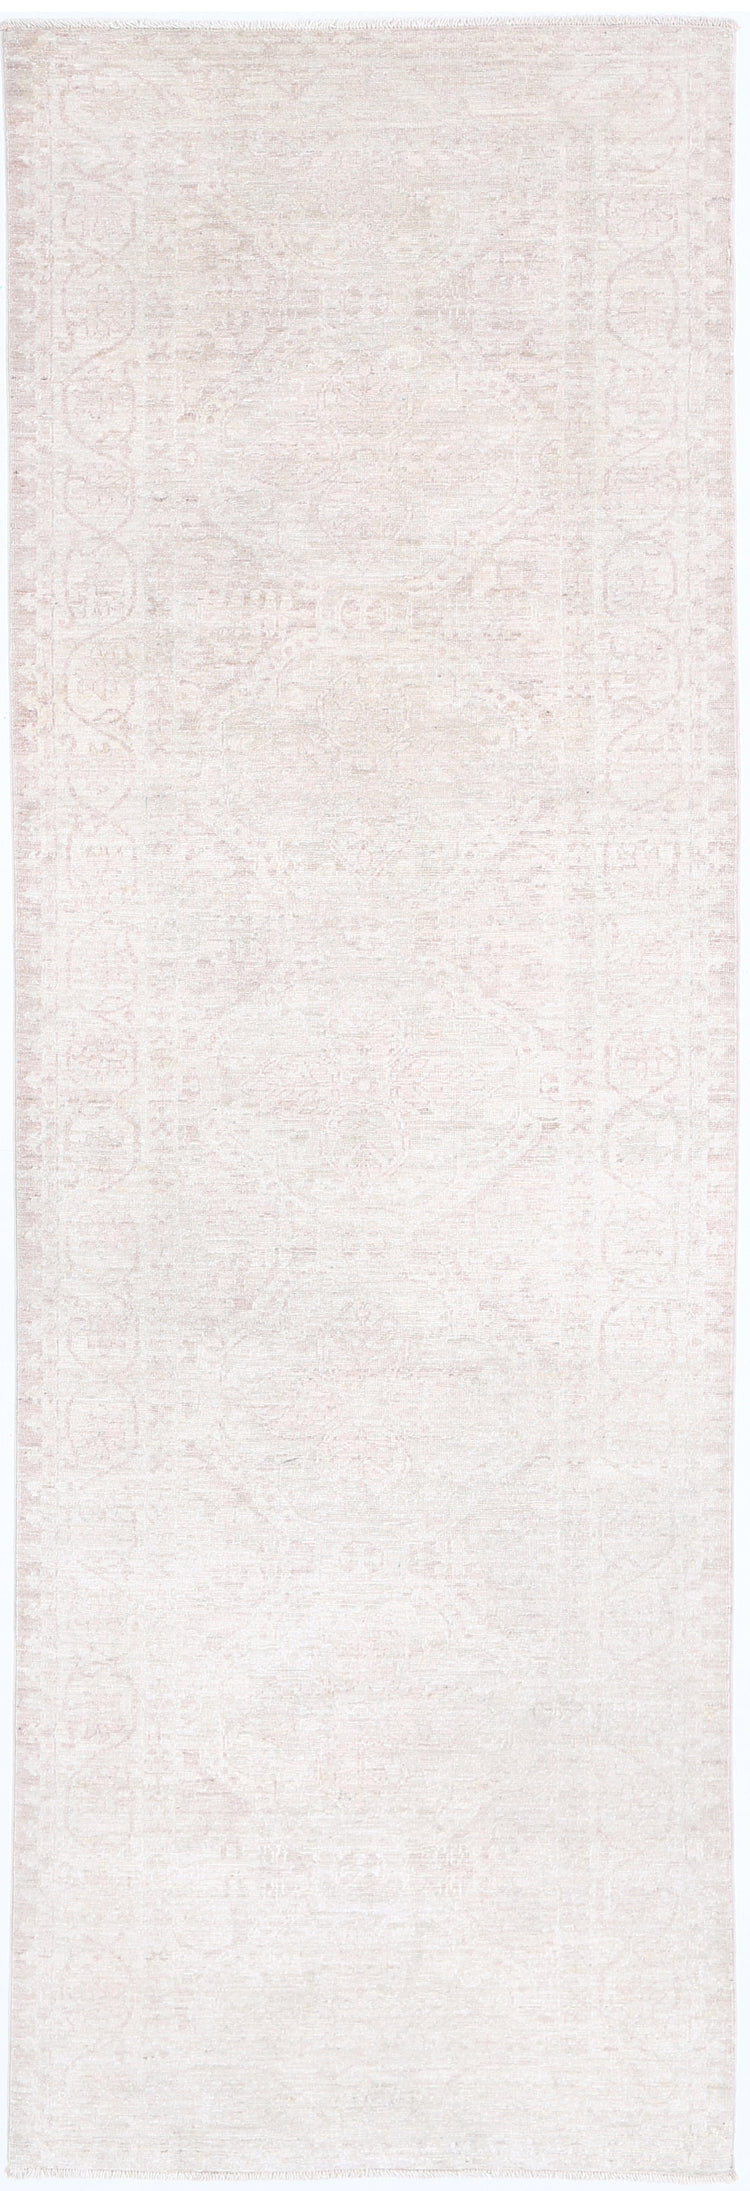 Traditional Hand Knotted Serenity Tabriz Wool Rug of Size 2'10'' X 9'6'' in Beige and Taupe Colors - Made in Afghanistan